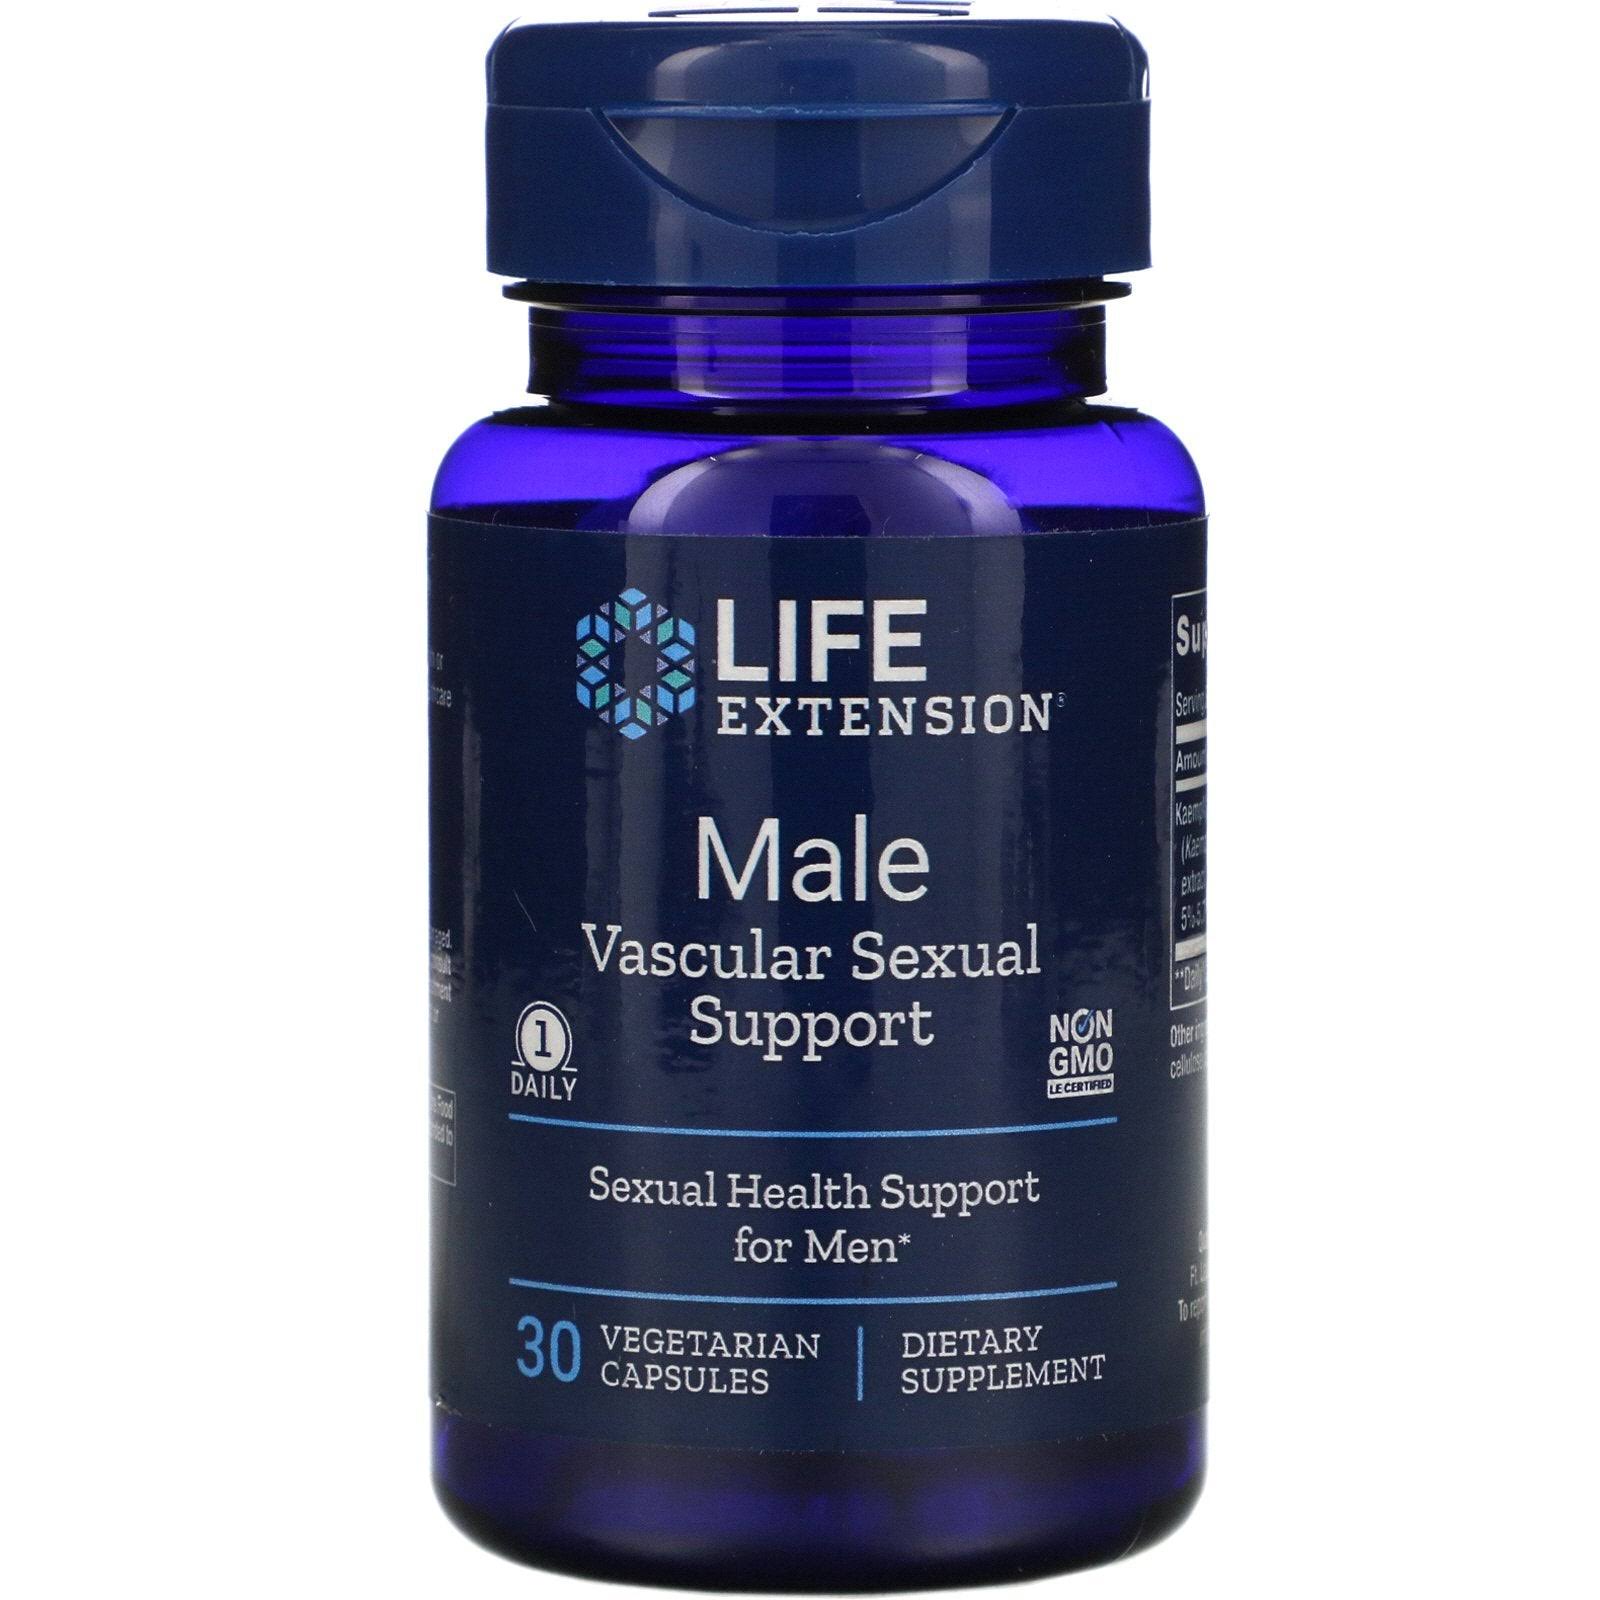 LIFE EXTENSION Male Vascular Sexual Support 30 Vegetarian Capsules